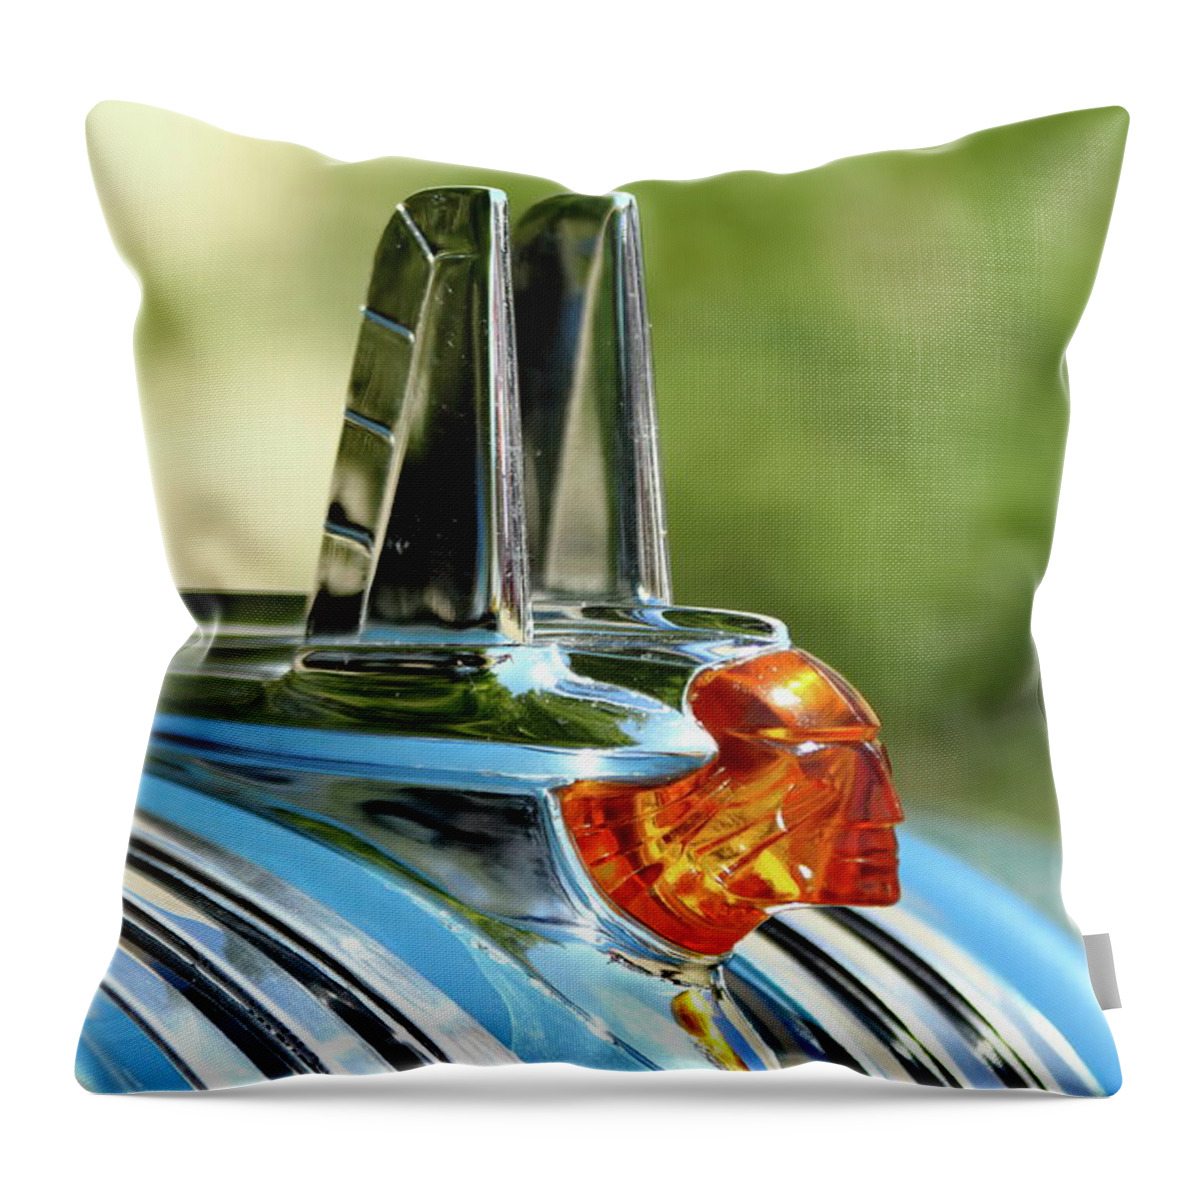 Pontiac Throw Pillow featuring the photograph Pontiac Proud by Lens Art Photography By Larry Trager